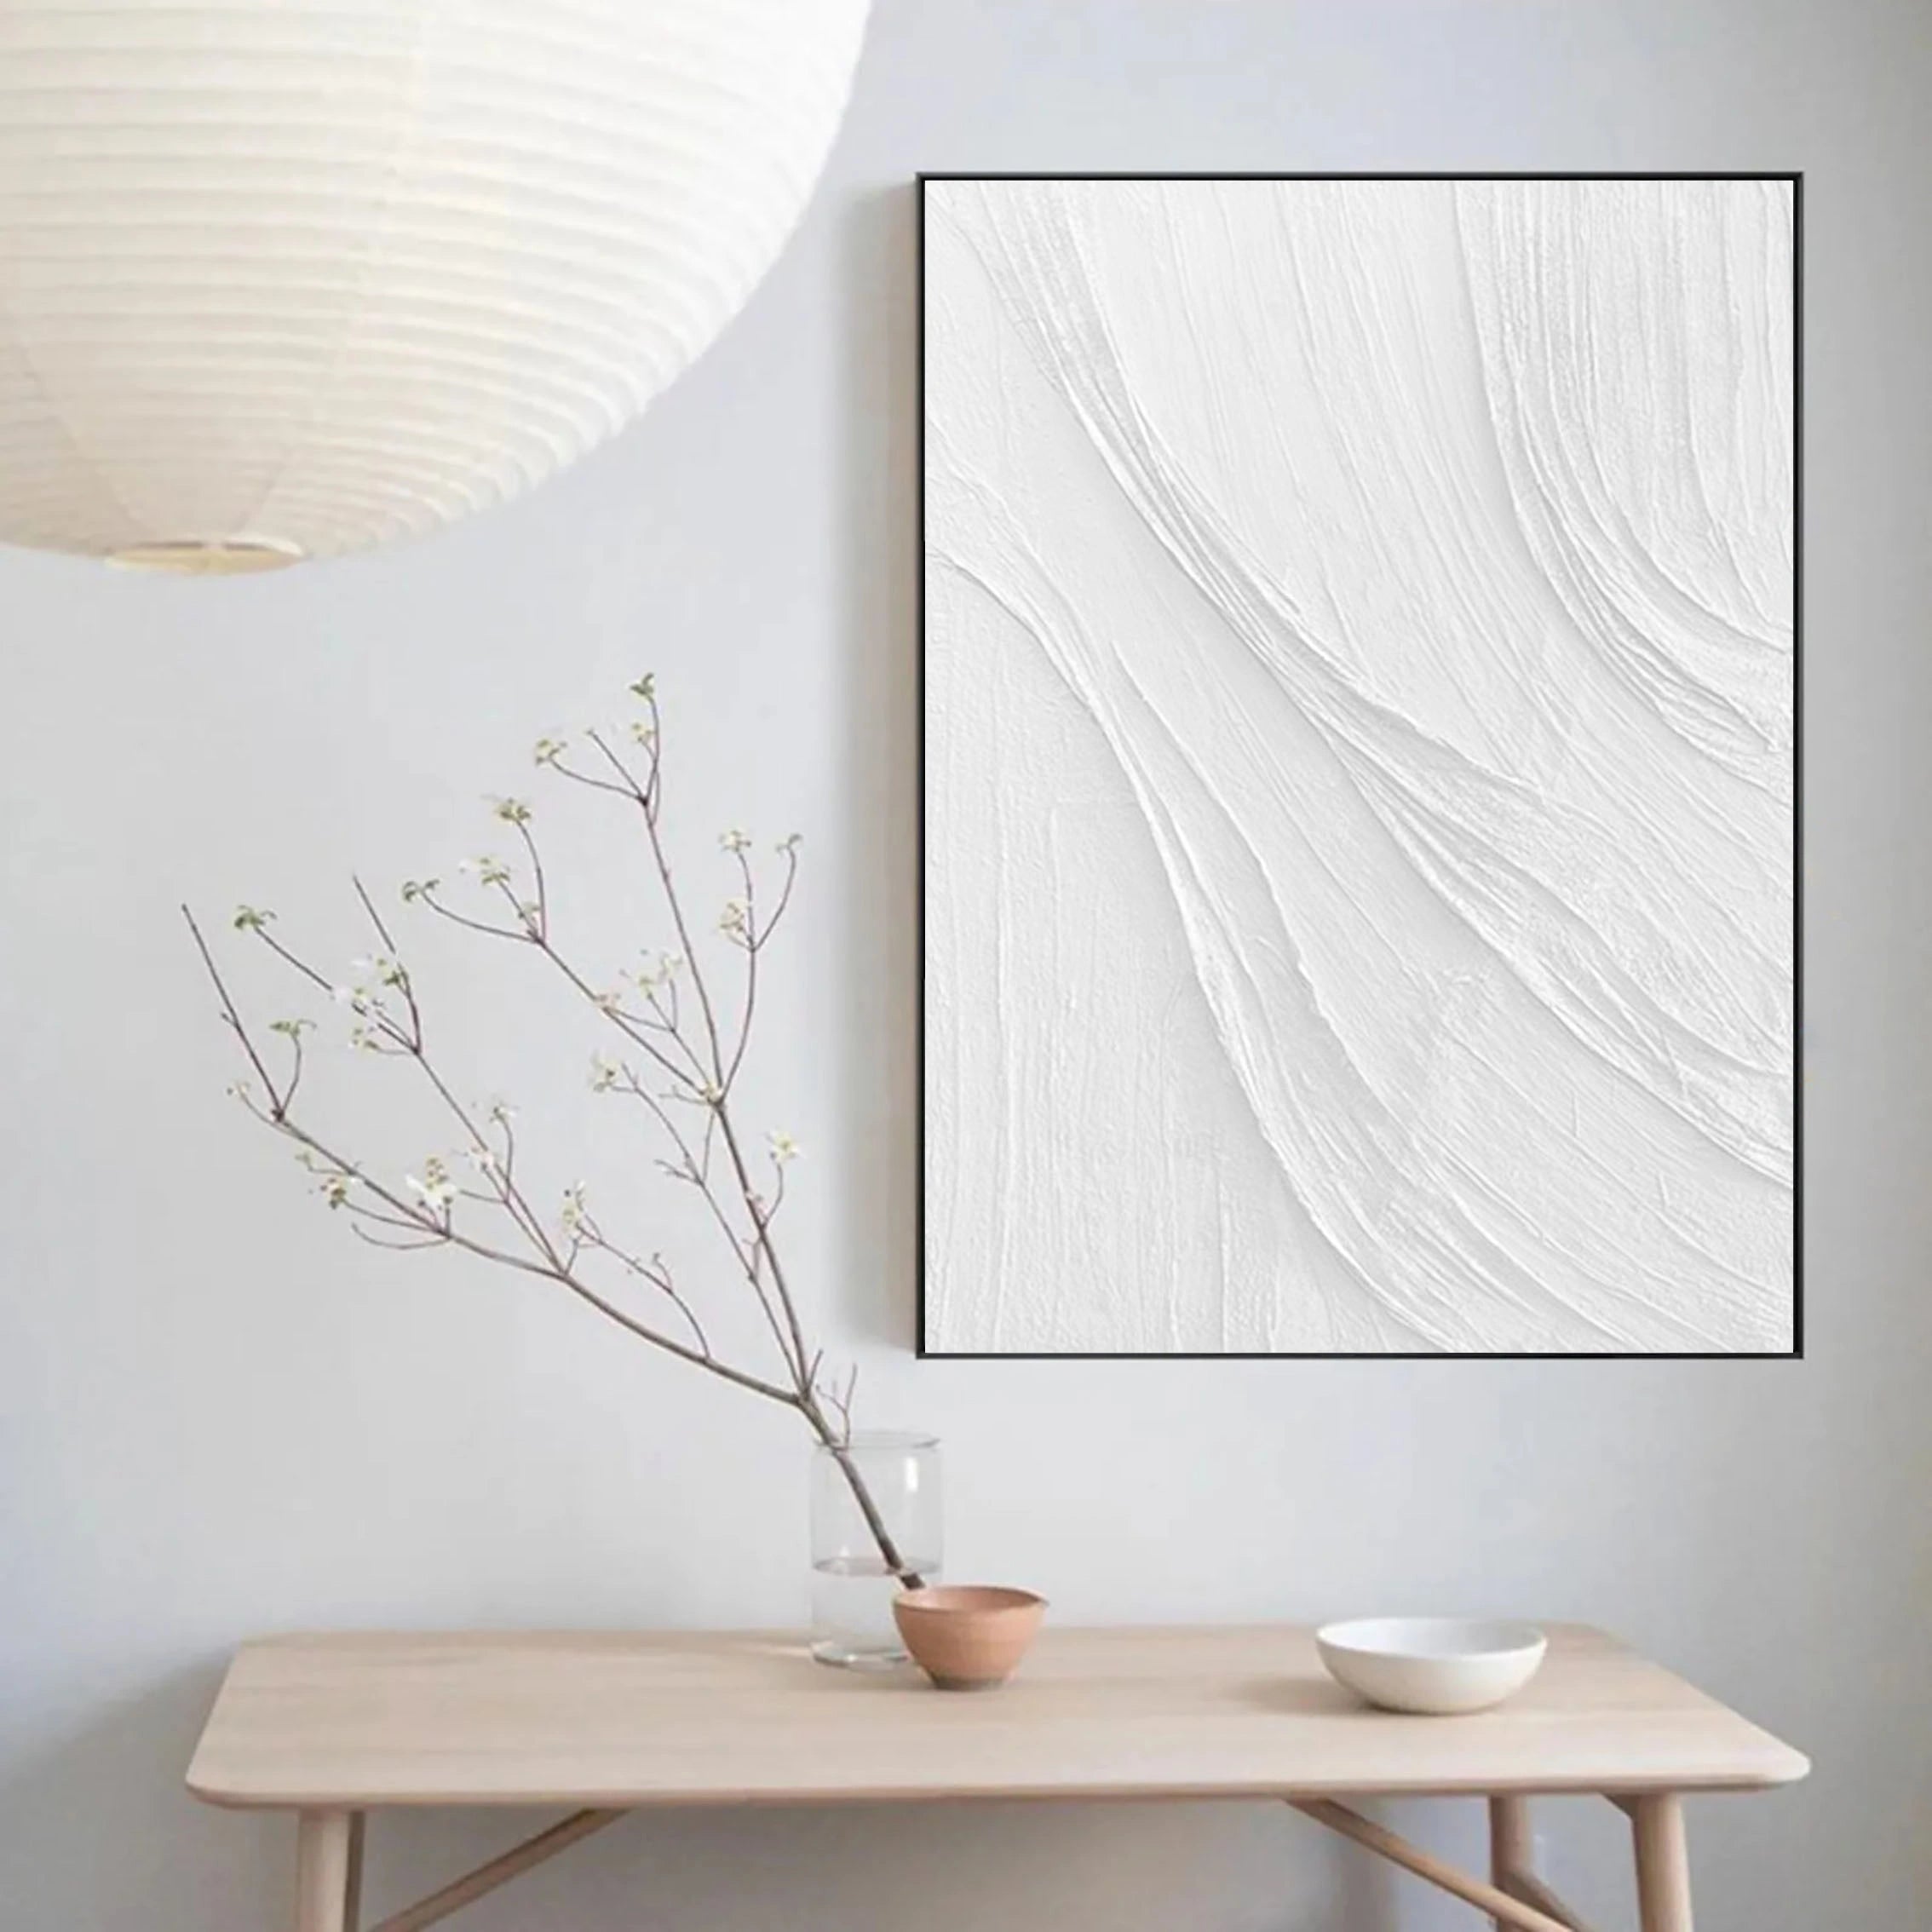 Plaster Minimalistic White Textured Large Painting for Bedroom/Living Room